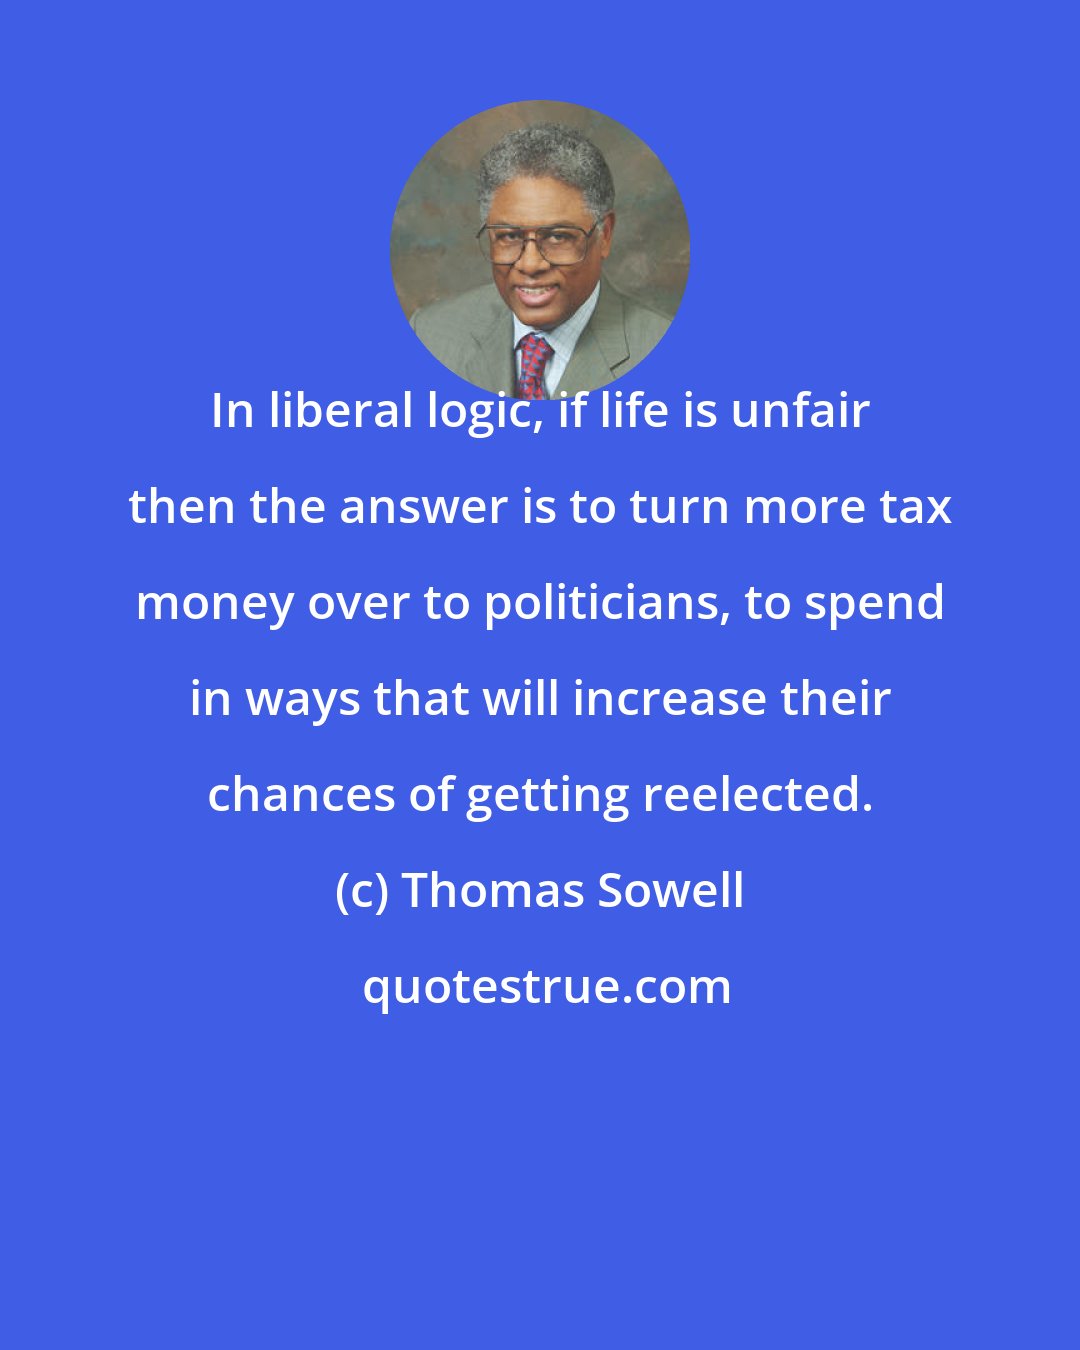 Thomas Sowell: In liberal logic, if life is unfair then the answer is to turn more tax money over to politicians, to spend in ways that will increase their chances of getting reelected.